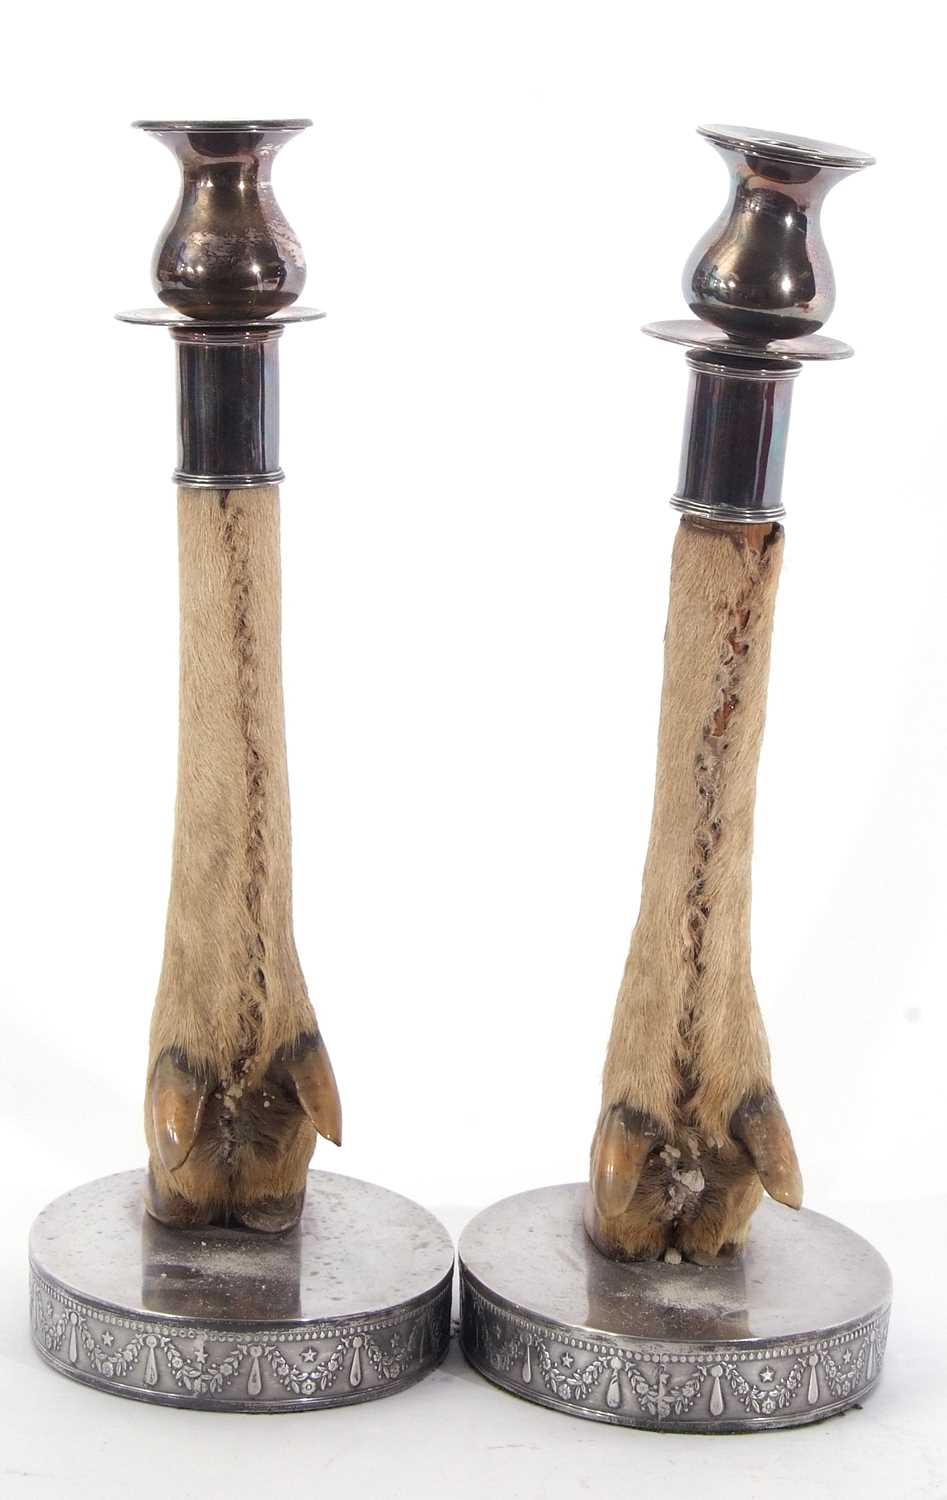 Pair of early 20th century novelty candlesticks, silver plated nozzles and mounts on the lower leg - Image 3 of 4